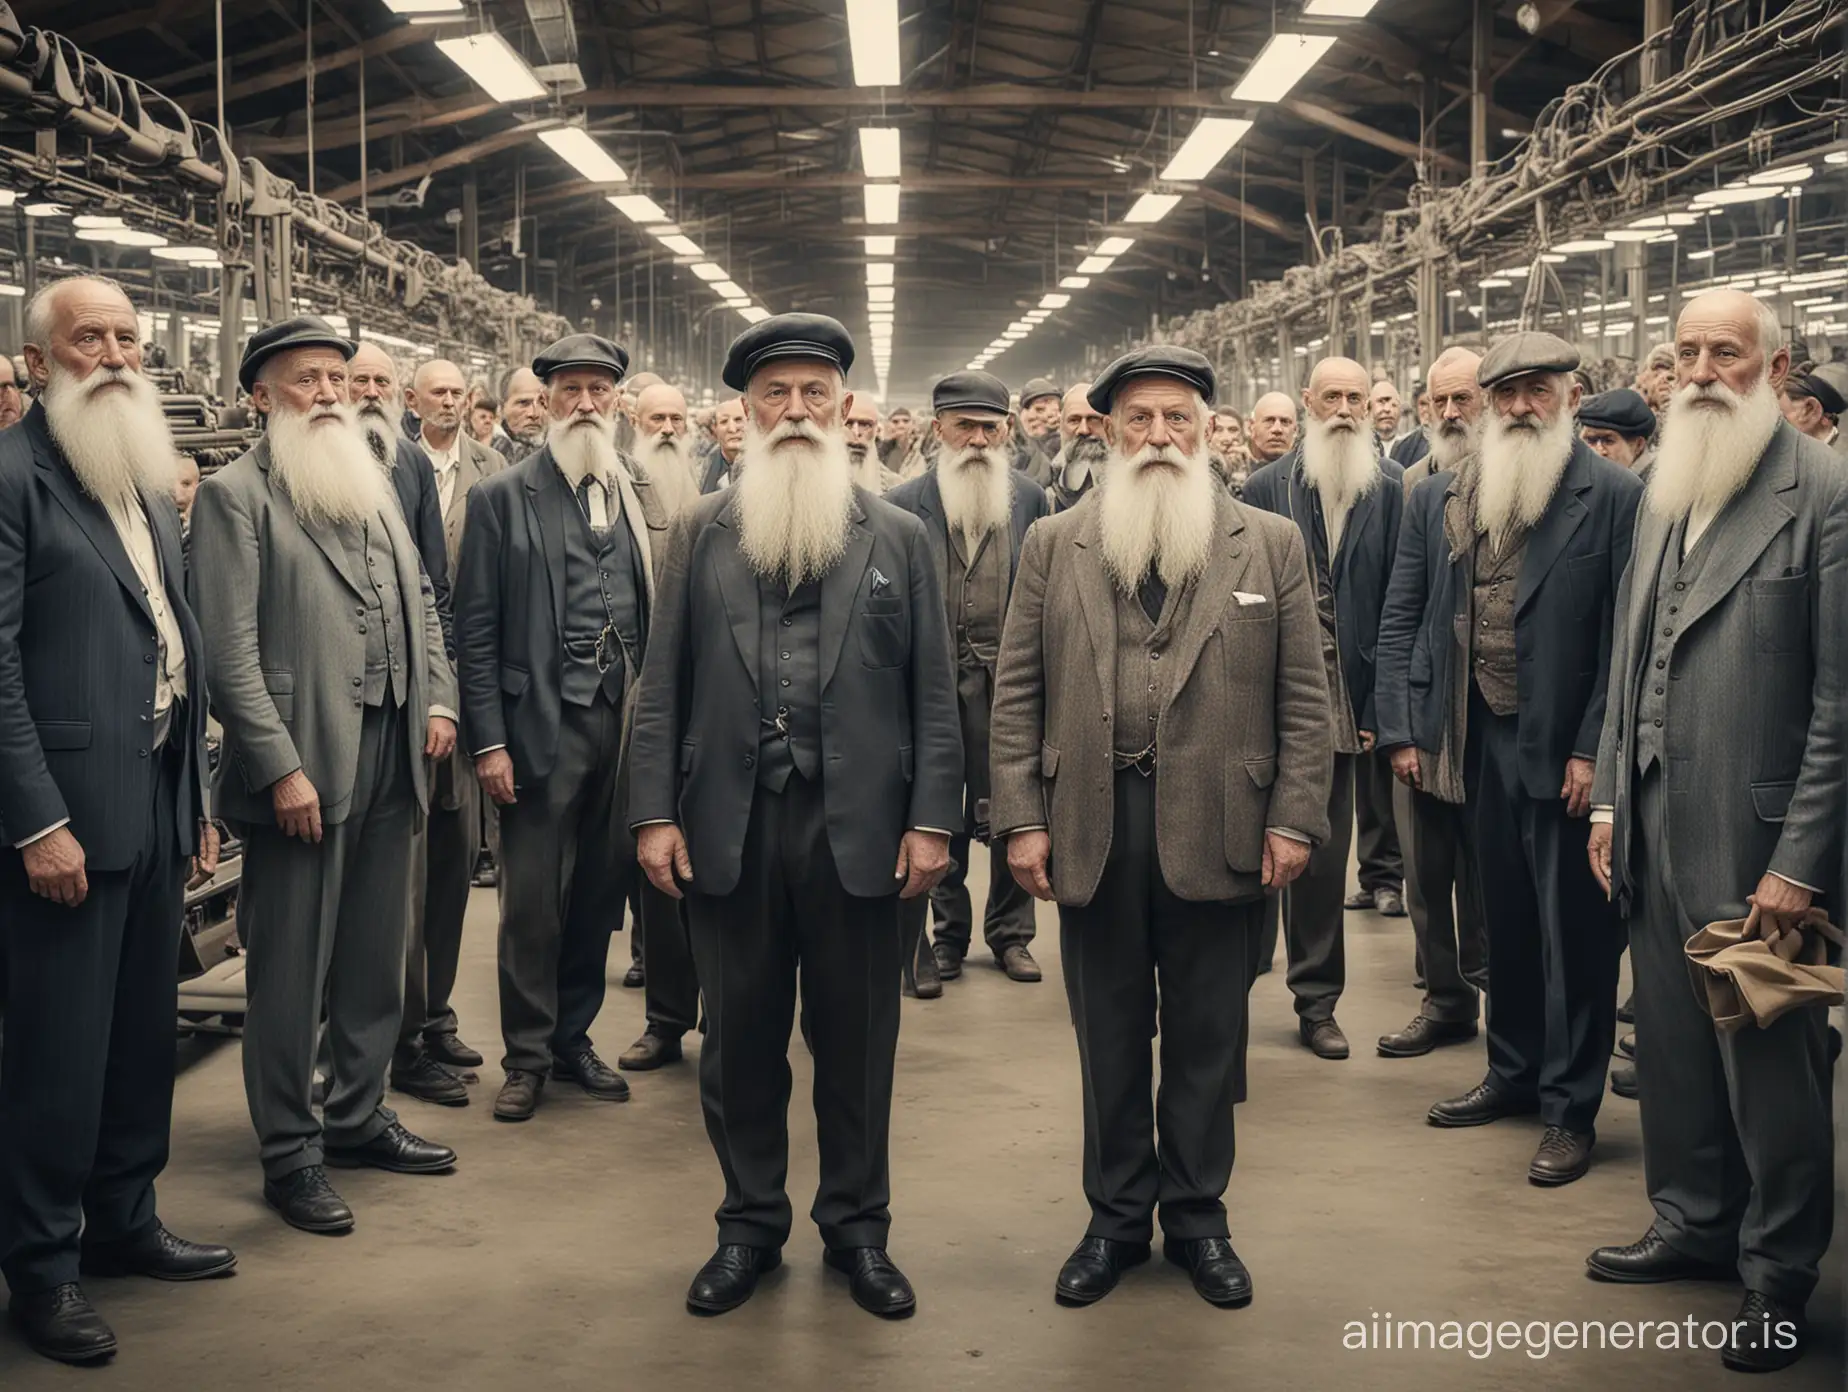 Vintage-Style-Memorial-Photo-of-Old-Men-in-Mega-Fabric-and-Textile-Factory-Germany